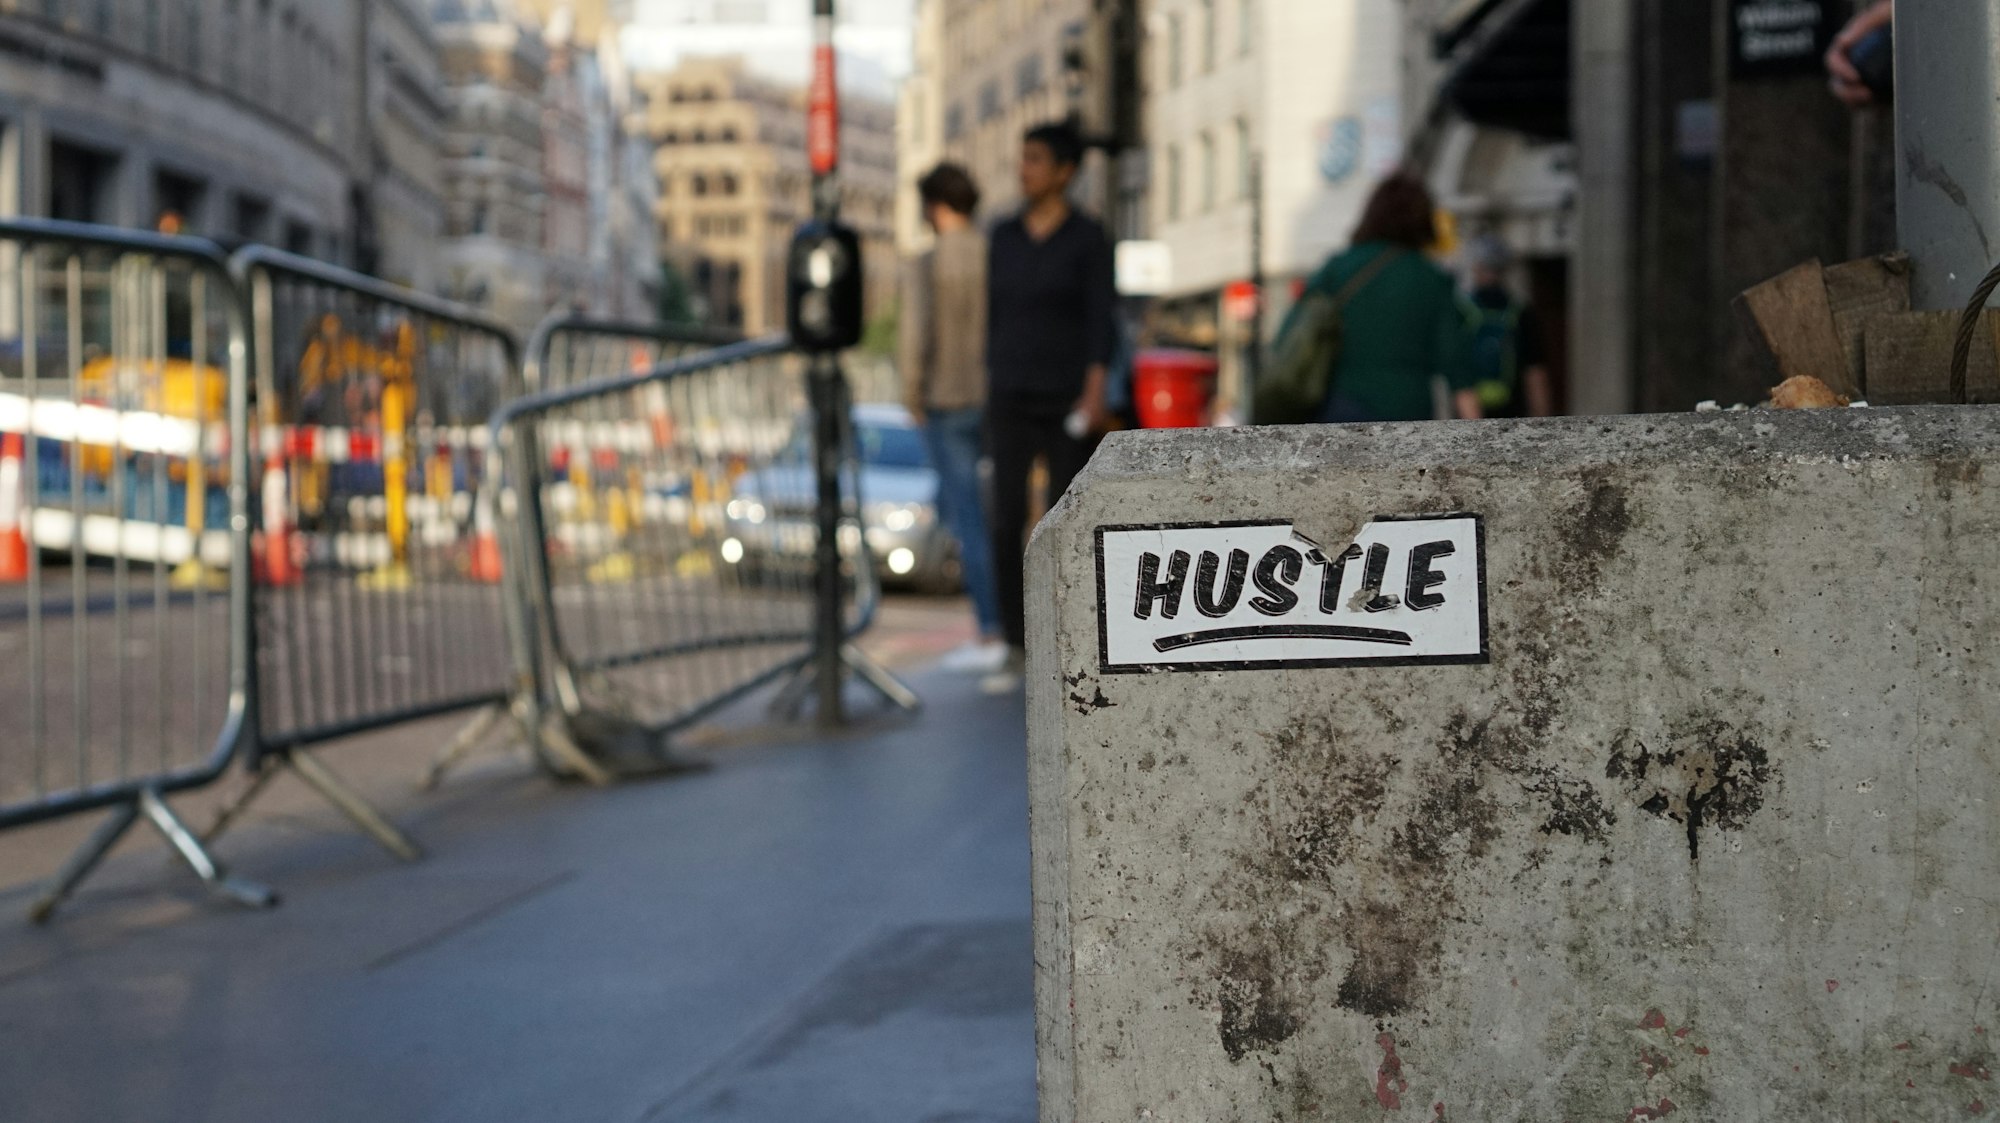 a sticker with the word "hustle" on a concrete block on a sidewalk, with barricades blocking lining the curb